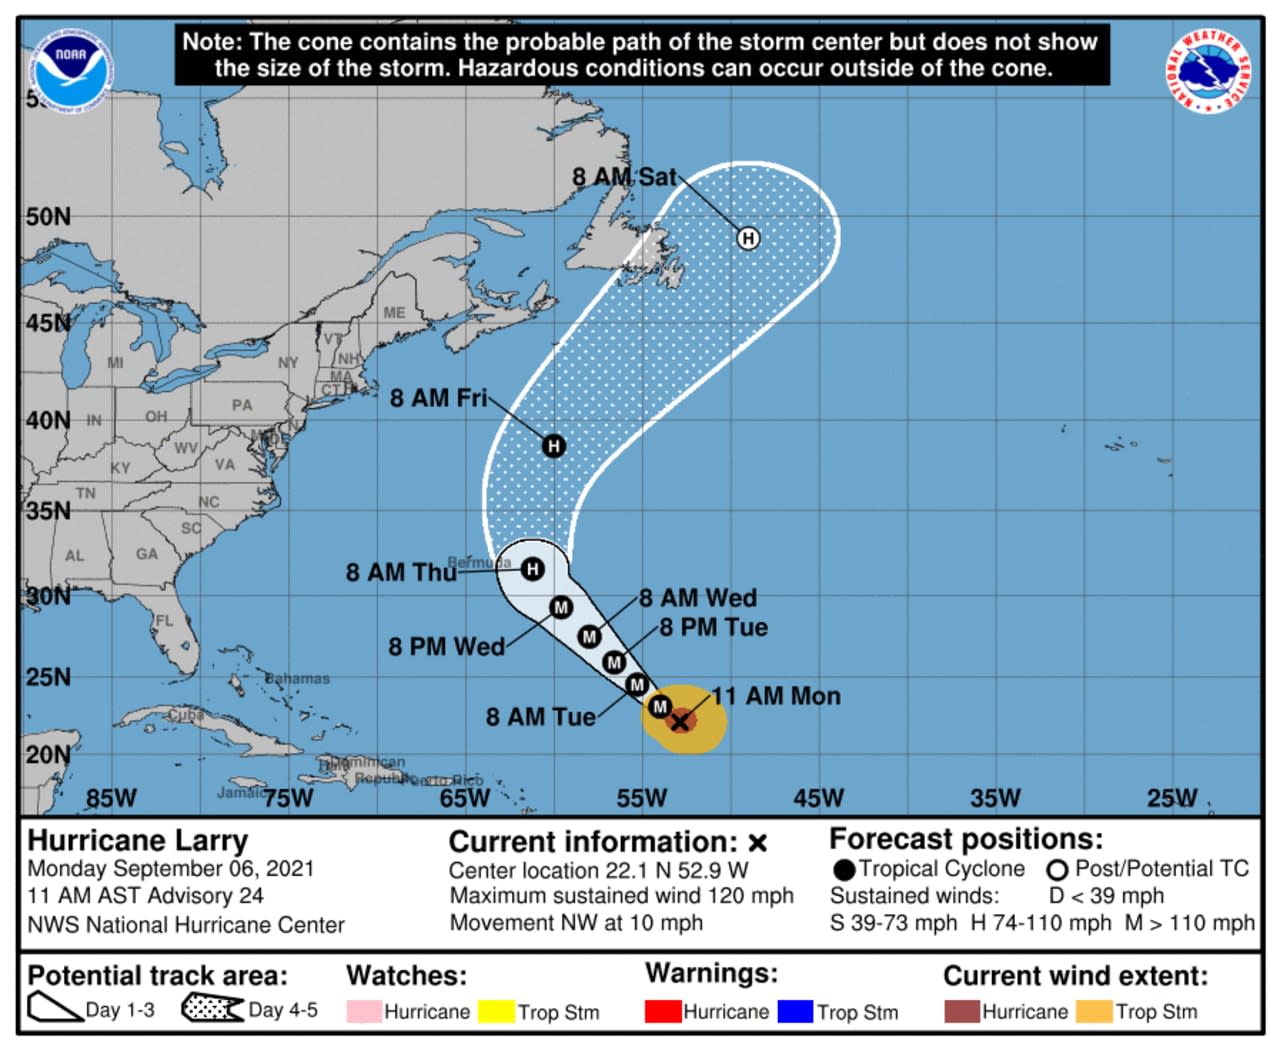 National Hurricane Center's latest look at Larry's projected track.